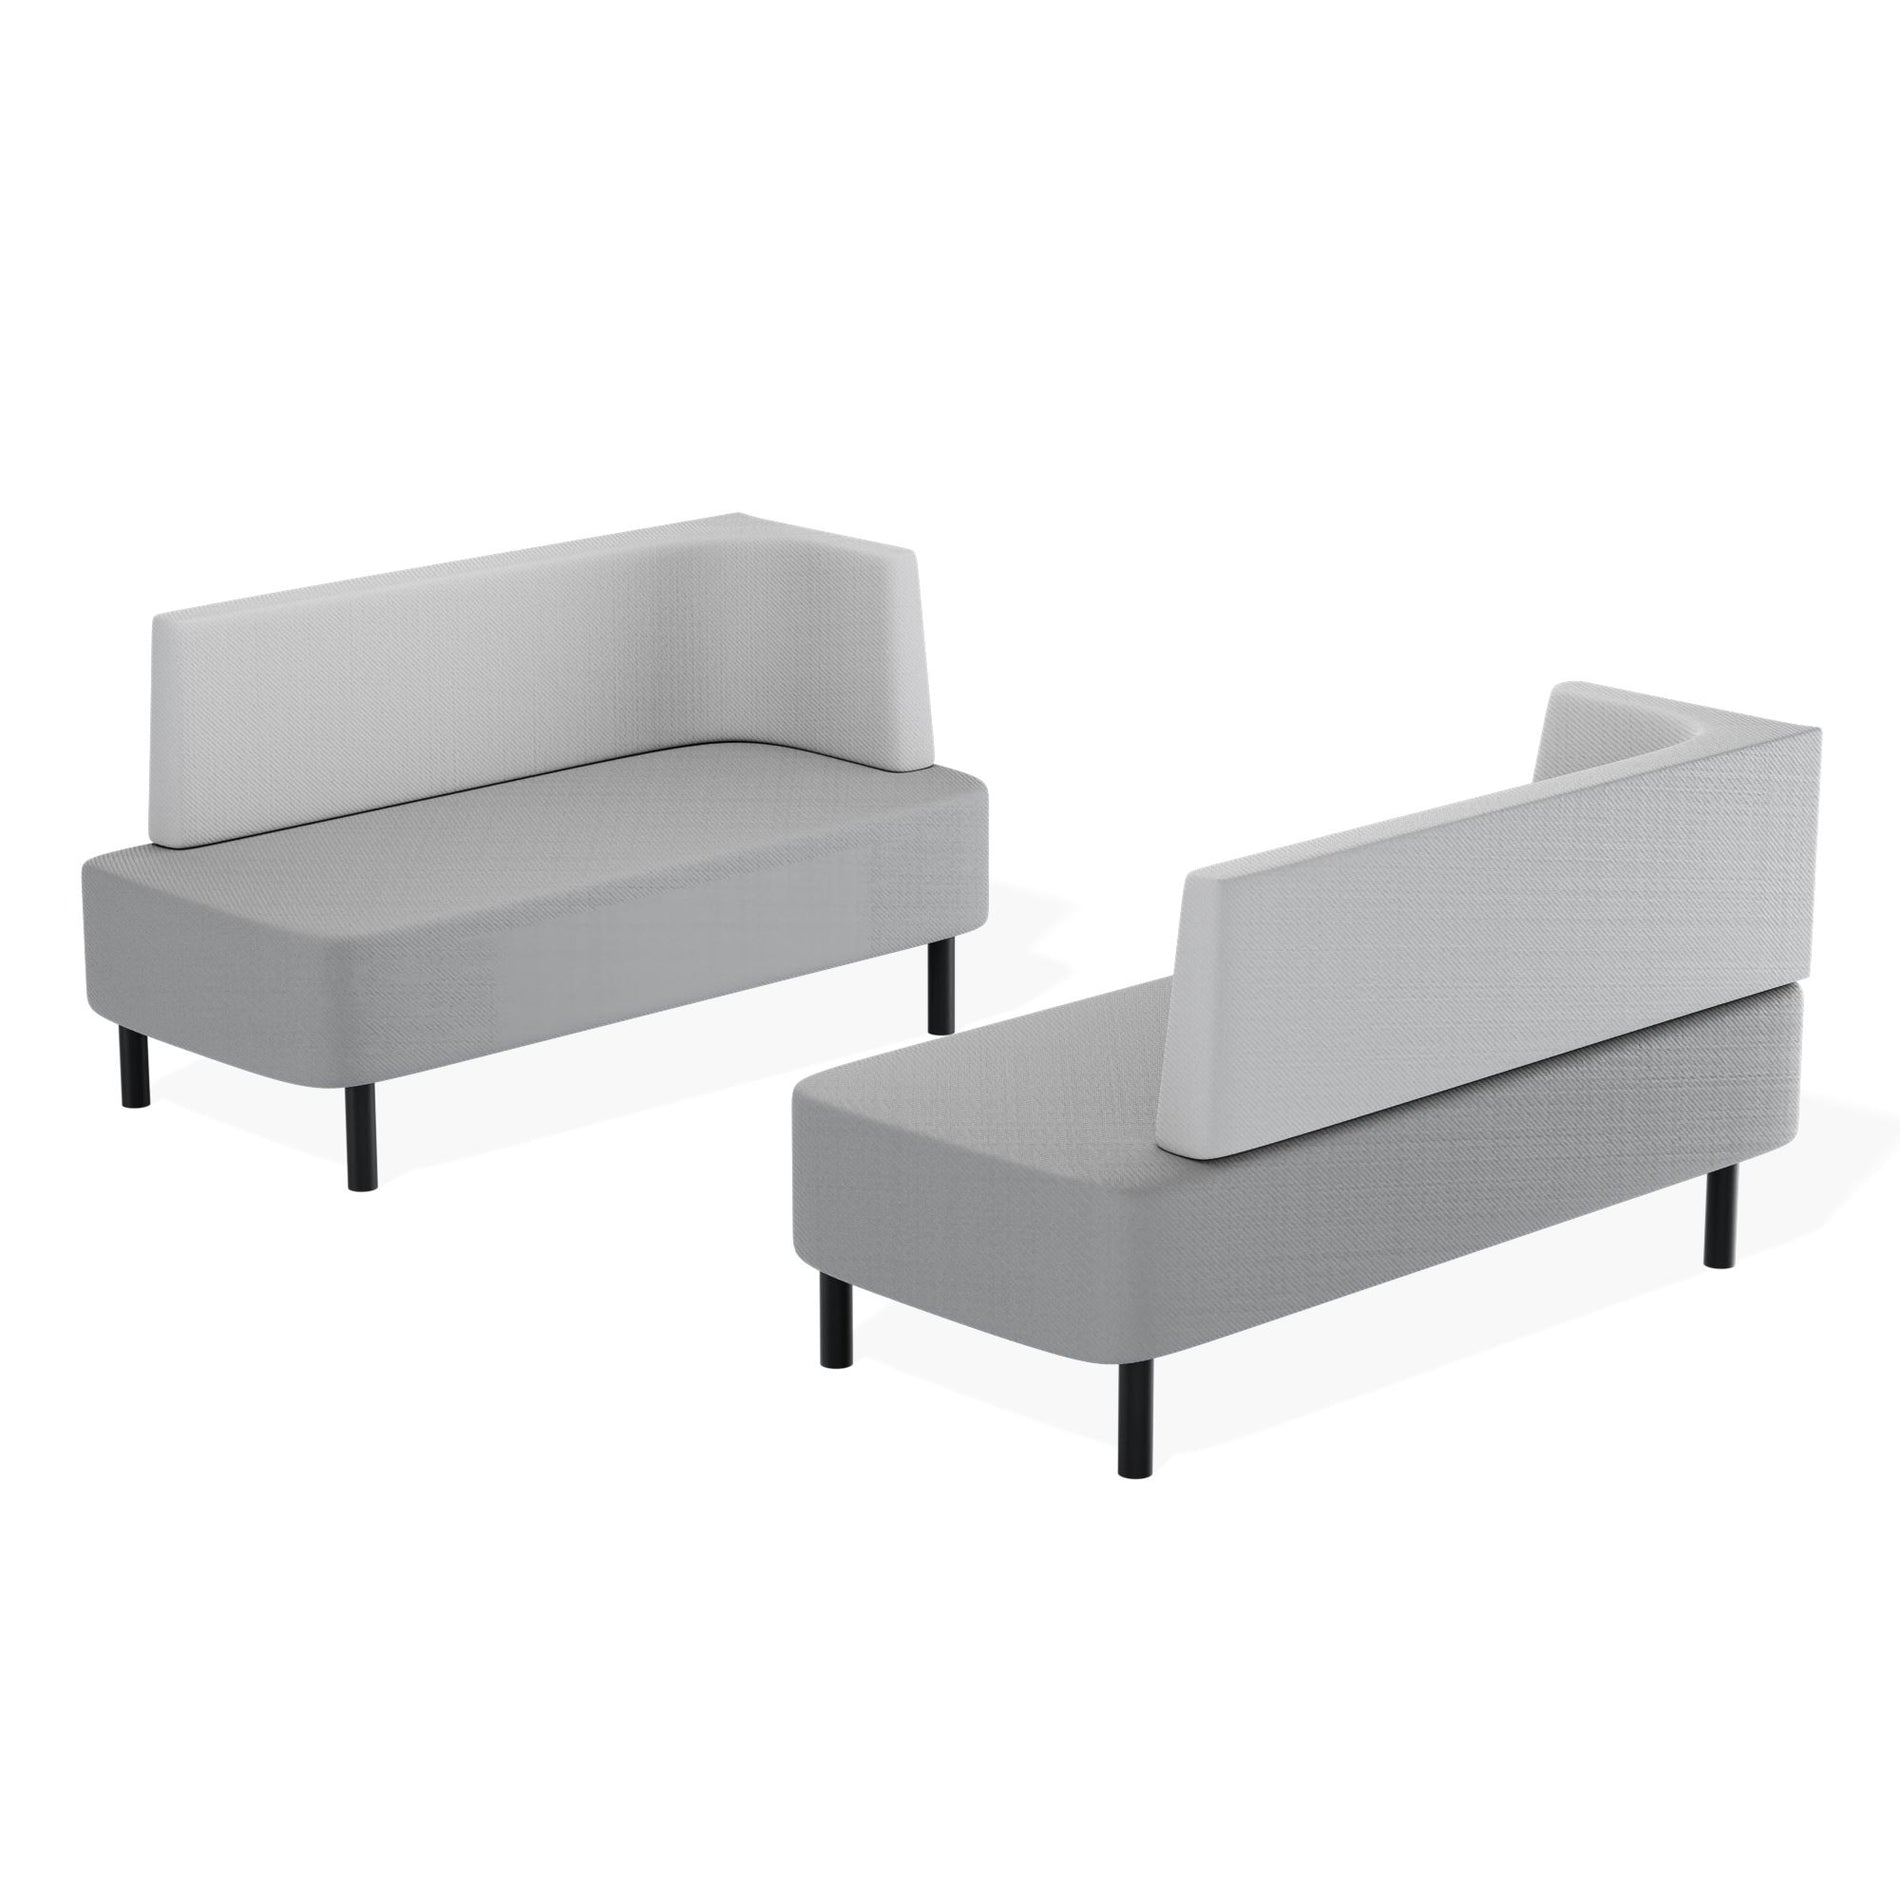 Quell - Meble Meeting Pod - 4 osoboweSofas